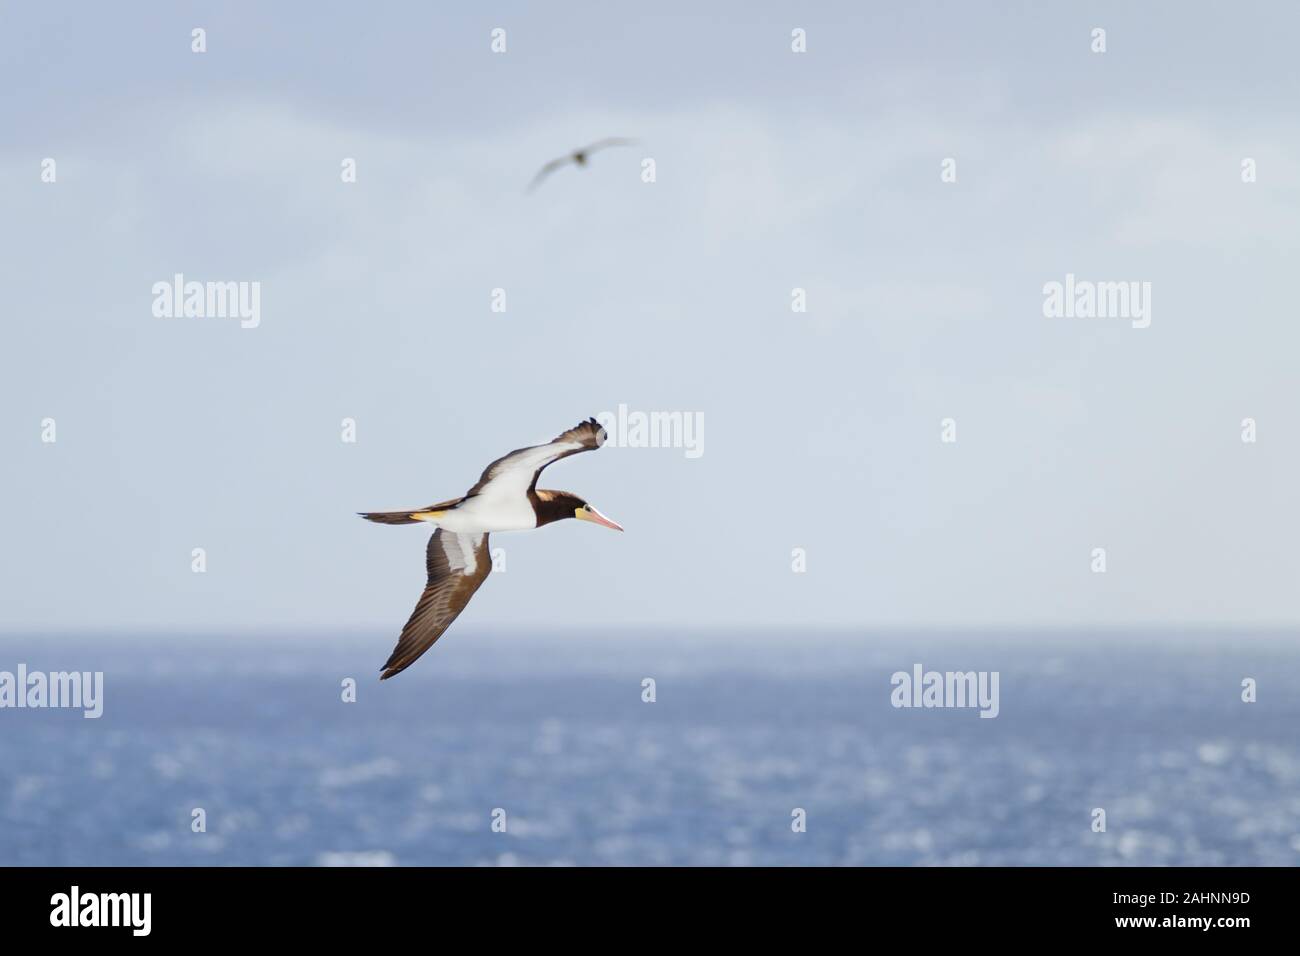 A Brown Booby, Sula leucogaster, flying over the Caribbean sea looking to feed on fish near the surface of the water Stock Photo